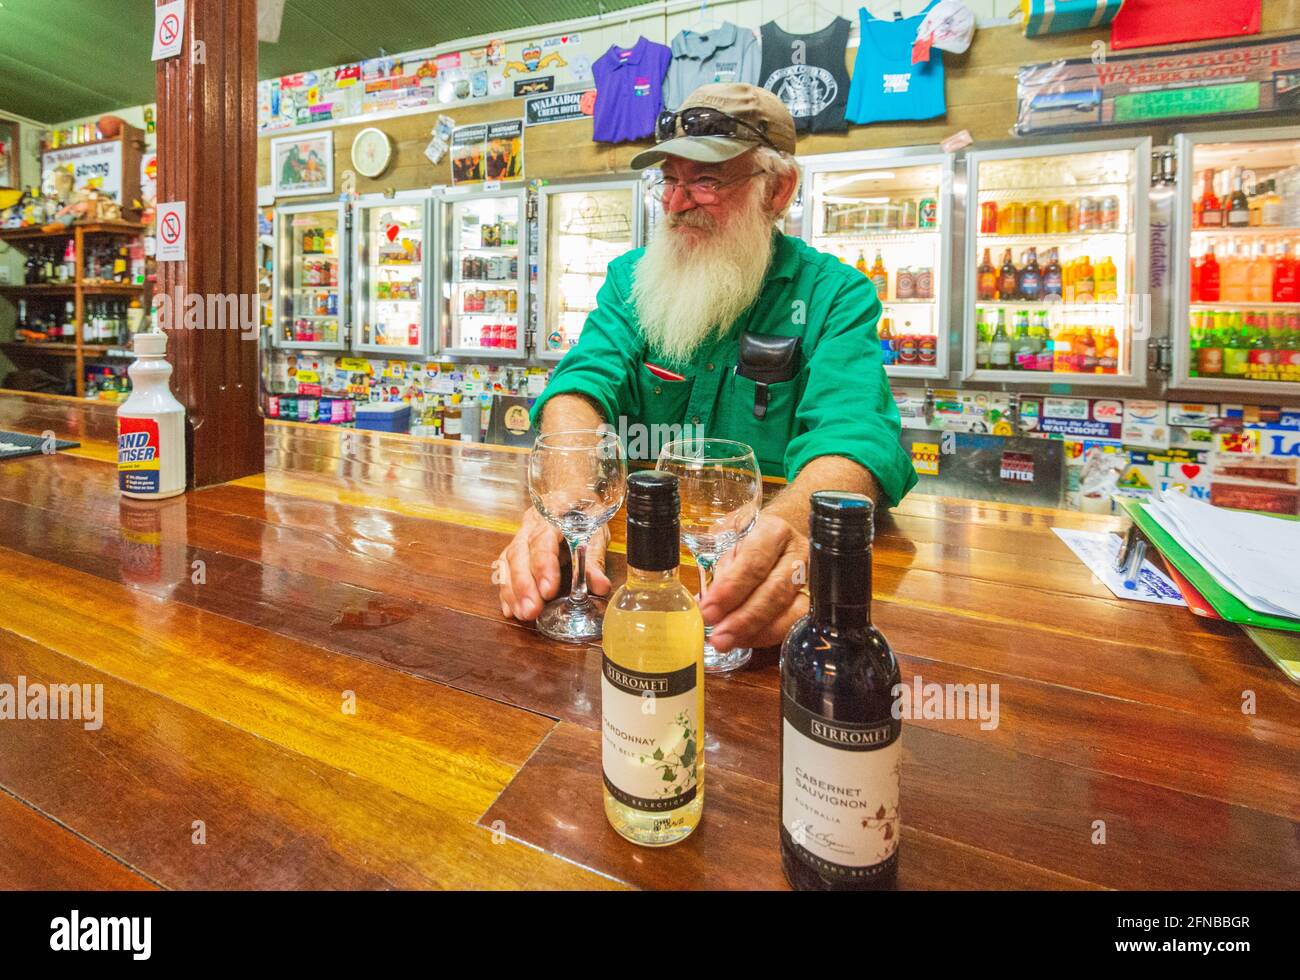 Smiling old bartender with a long white beard serving bottles of wine at the Walkabout Creek Hotel featured in the Crocodile Dundee's movie, Central Q Stock Photo